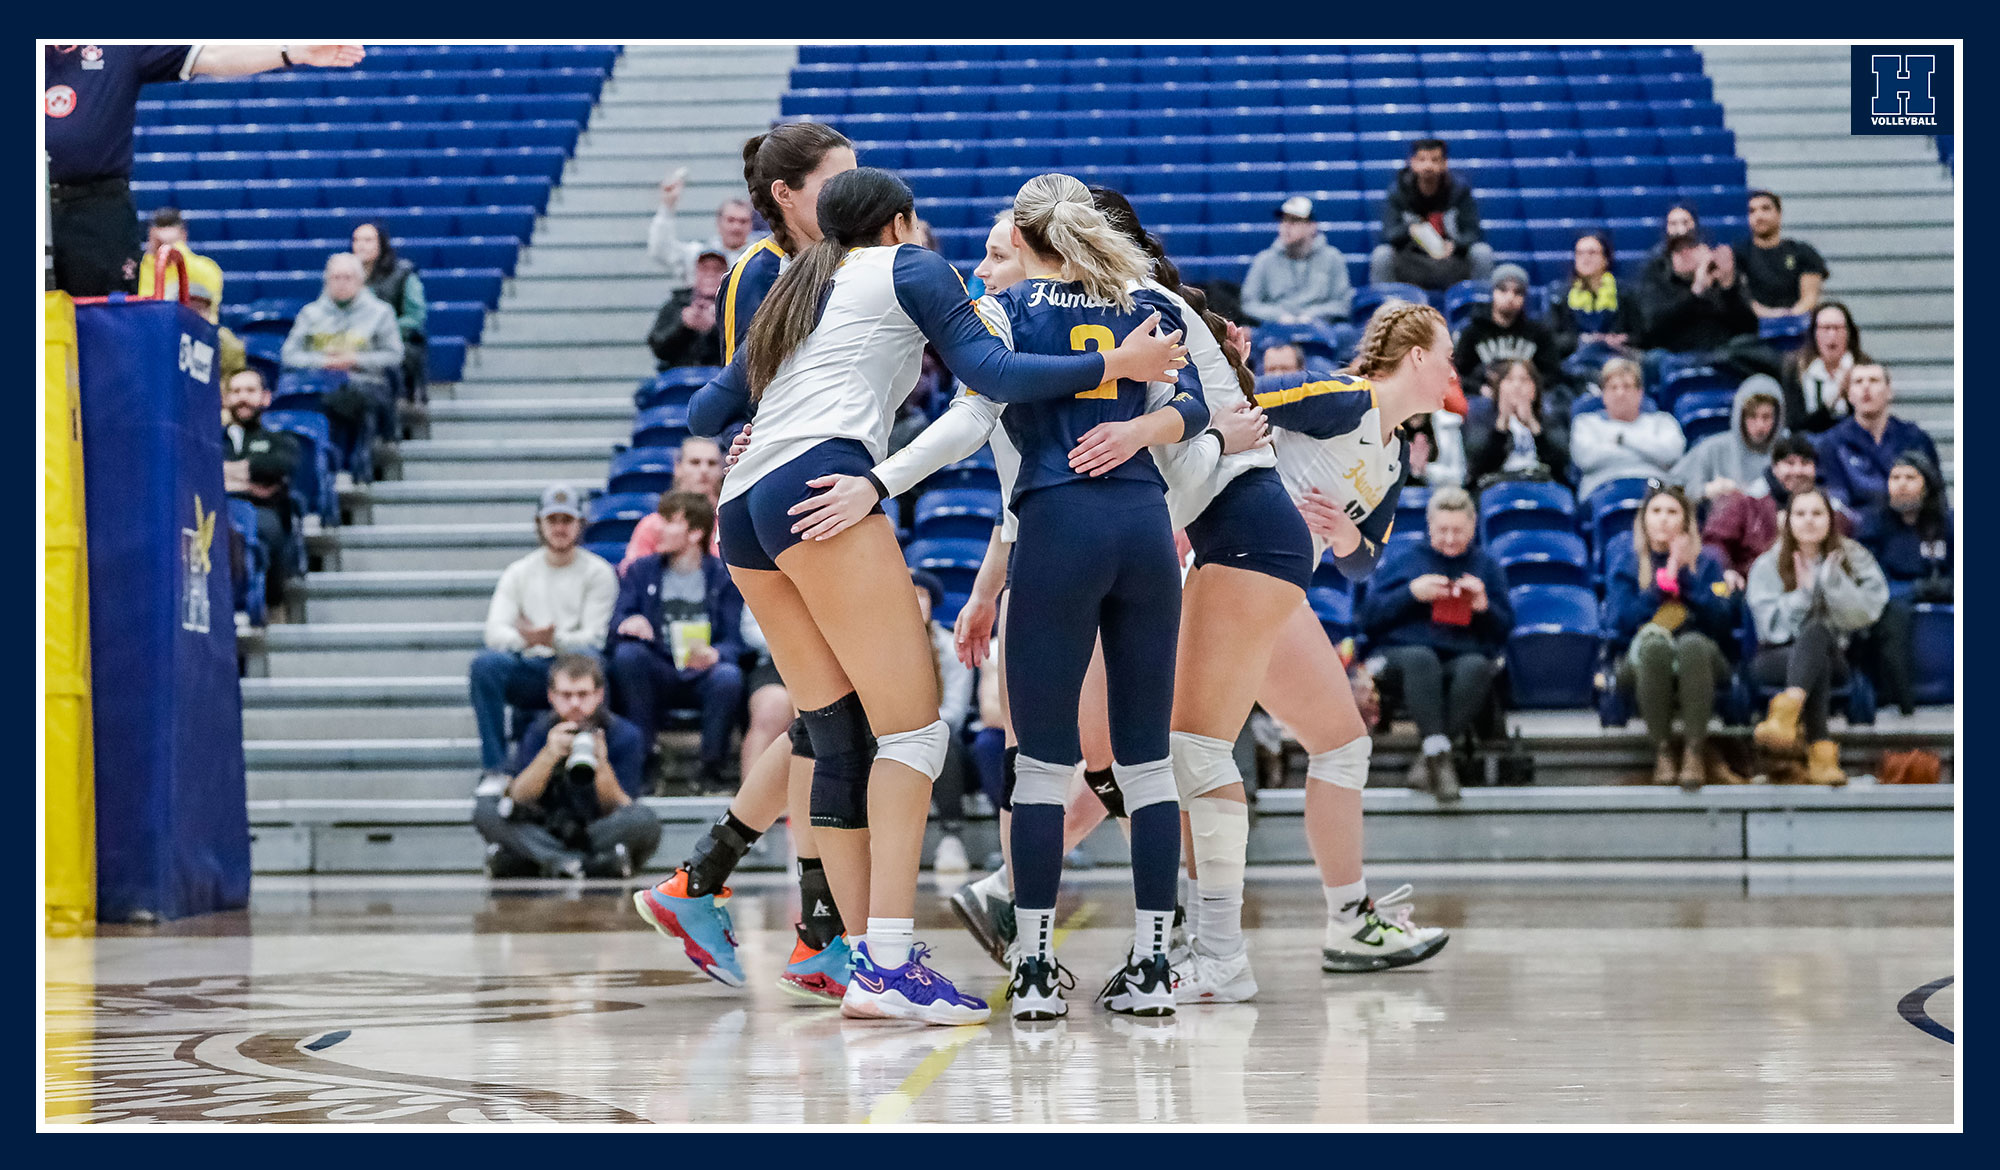 Women's volleyball celebrating a point against St. Clair